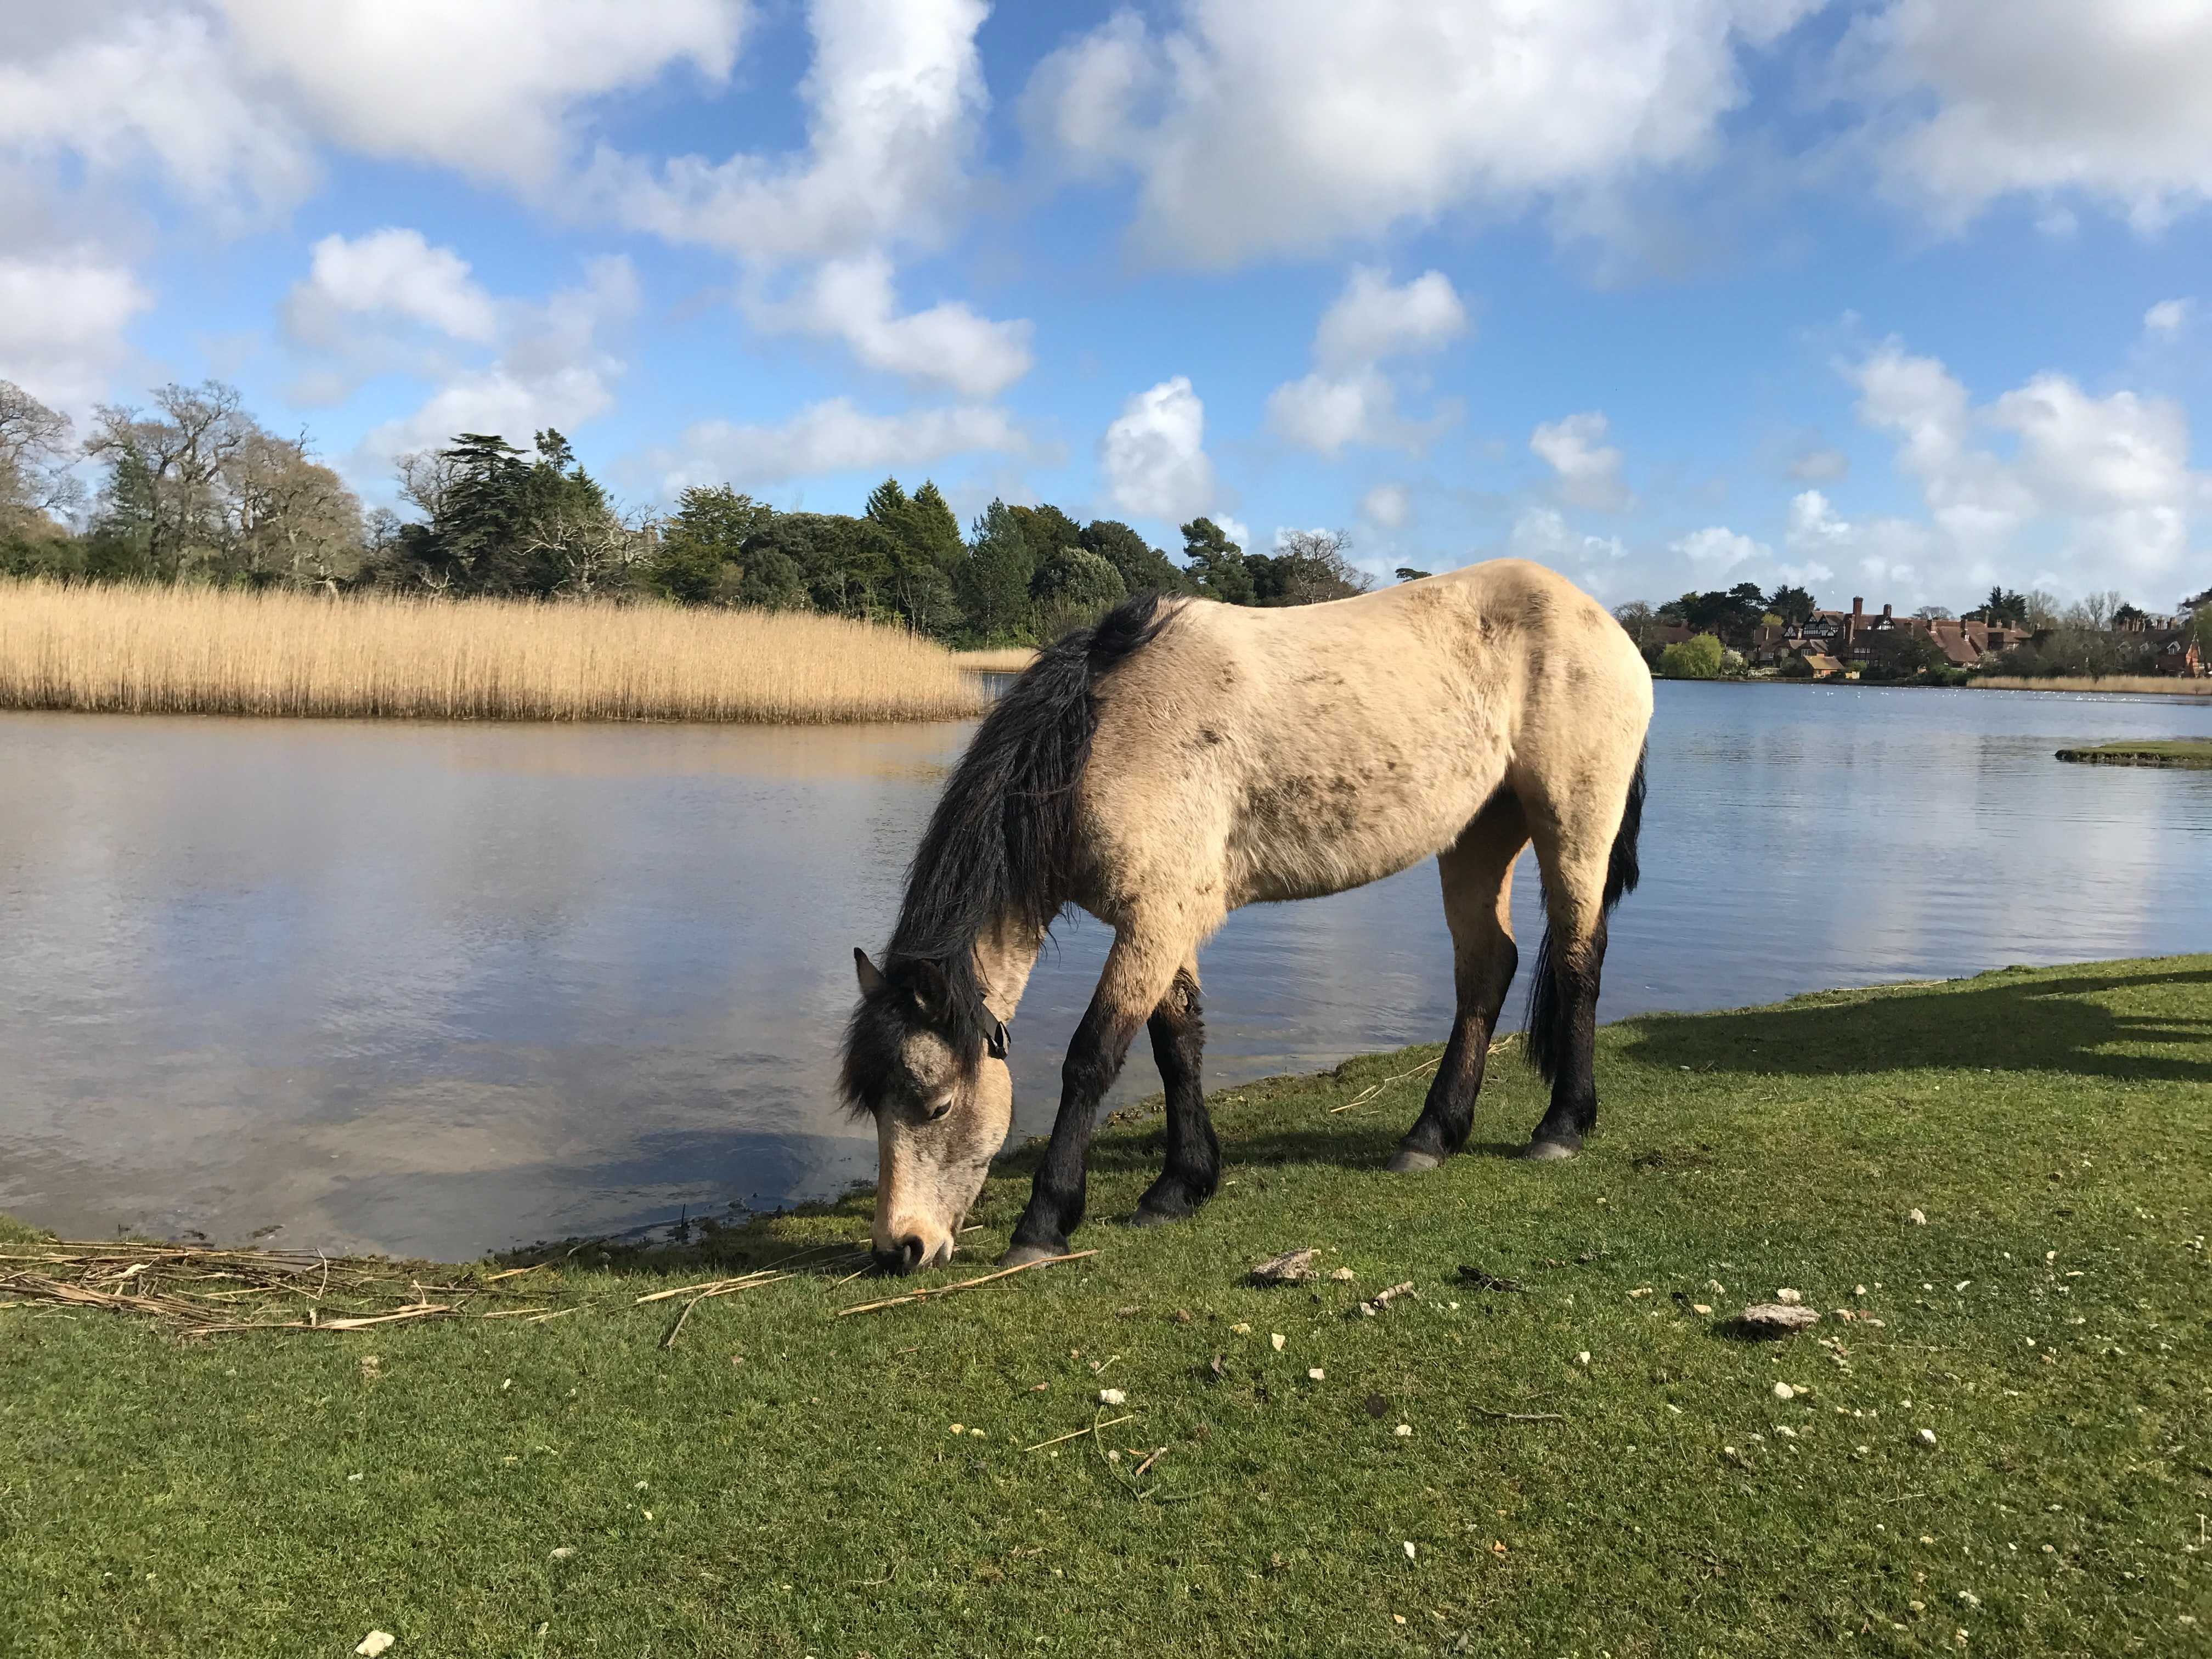 New Forest ponies - Photo by Carl Beech on Unsplash